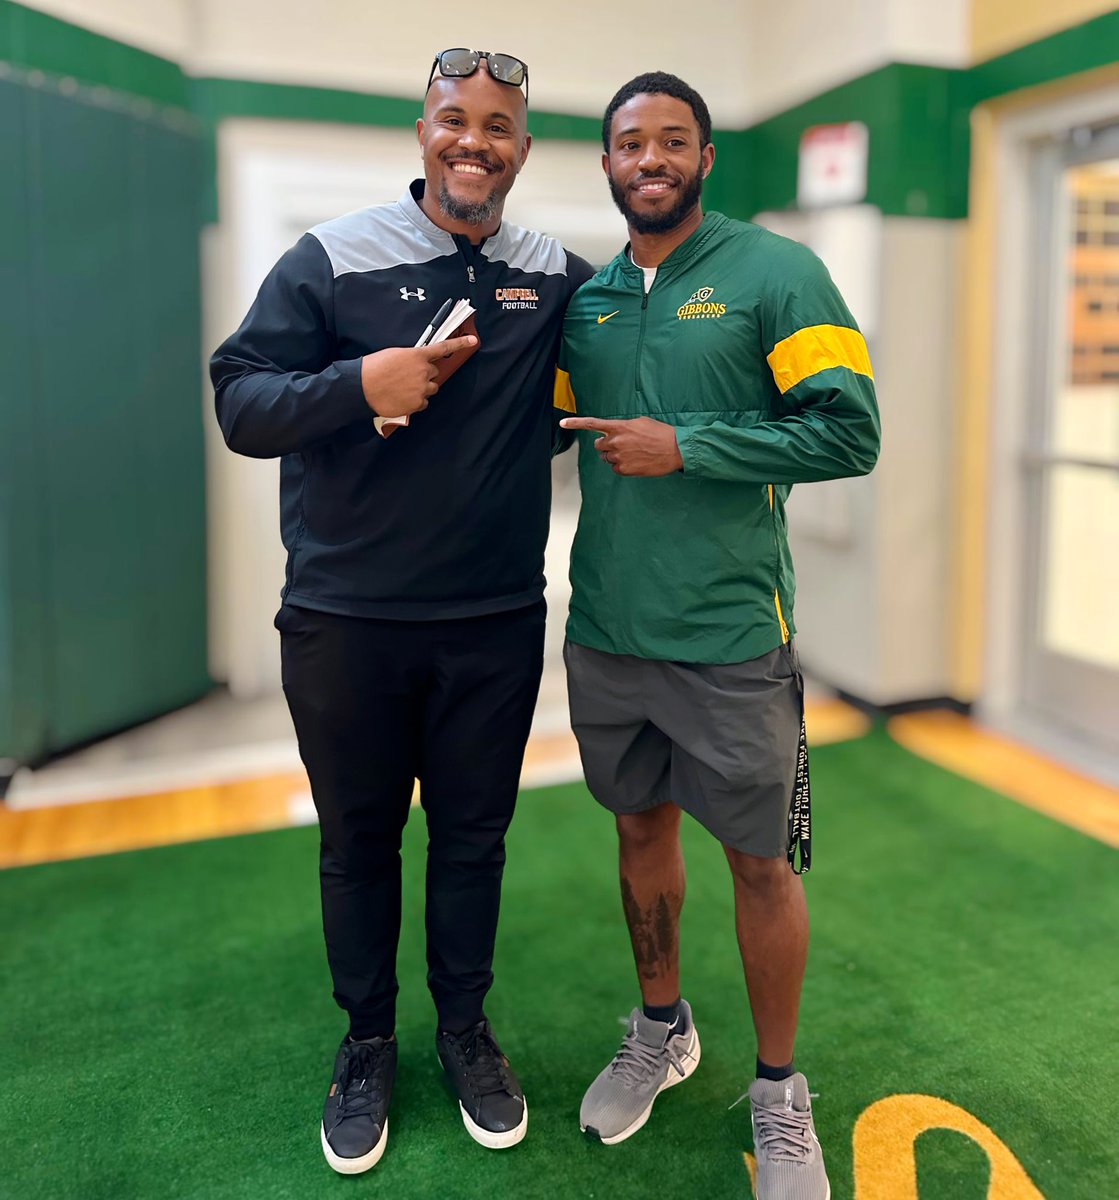 Great catching up with a @GoCamelsFB Alum. Coach Drew at Cardinal Gibbons — Thank you for having me! 🔍🔦 #findingtheHEAT 🔥🐫